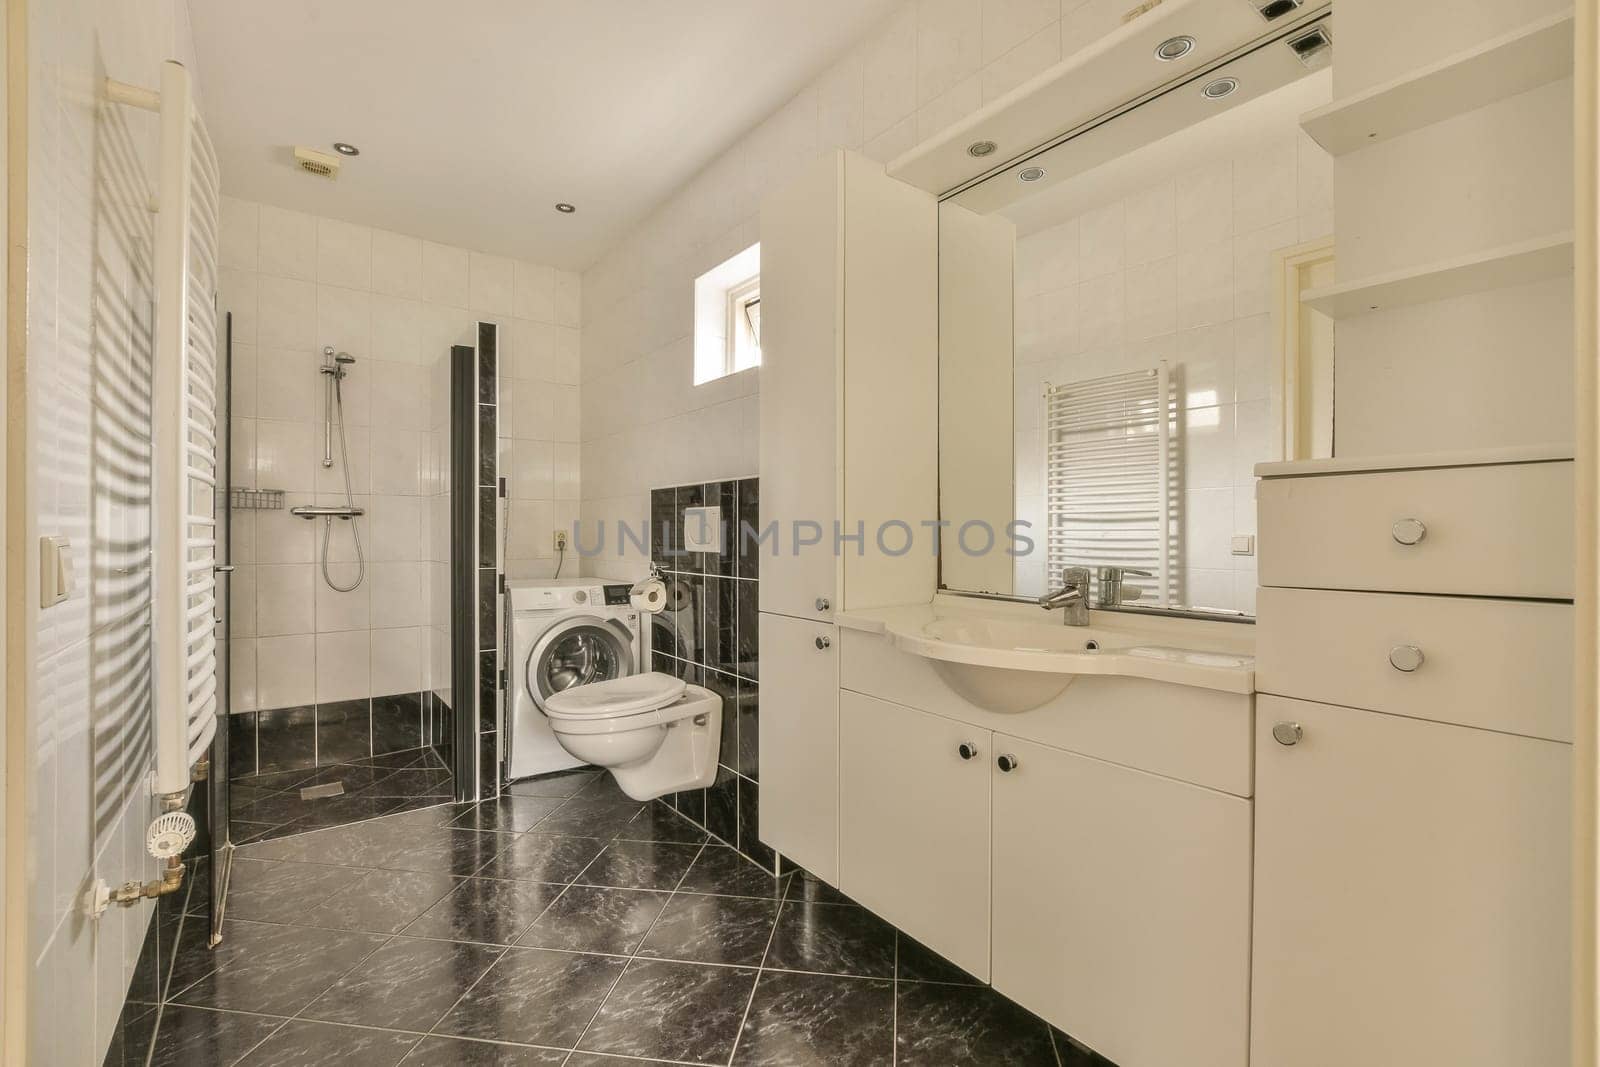 a modern bathroom with black and white marble flooring, sink, mirror and shower stall in the corner area